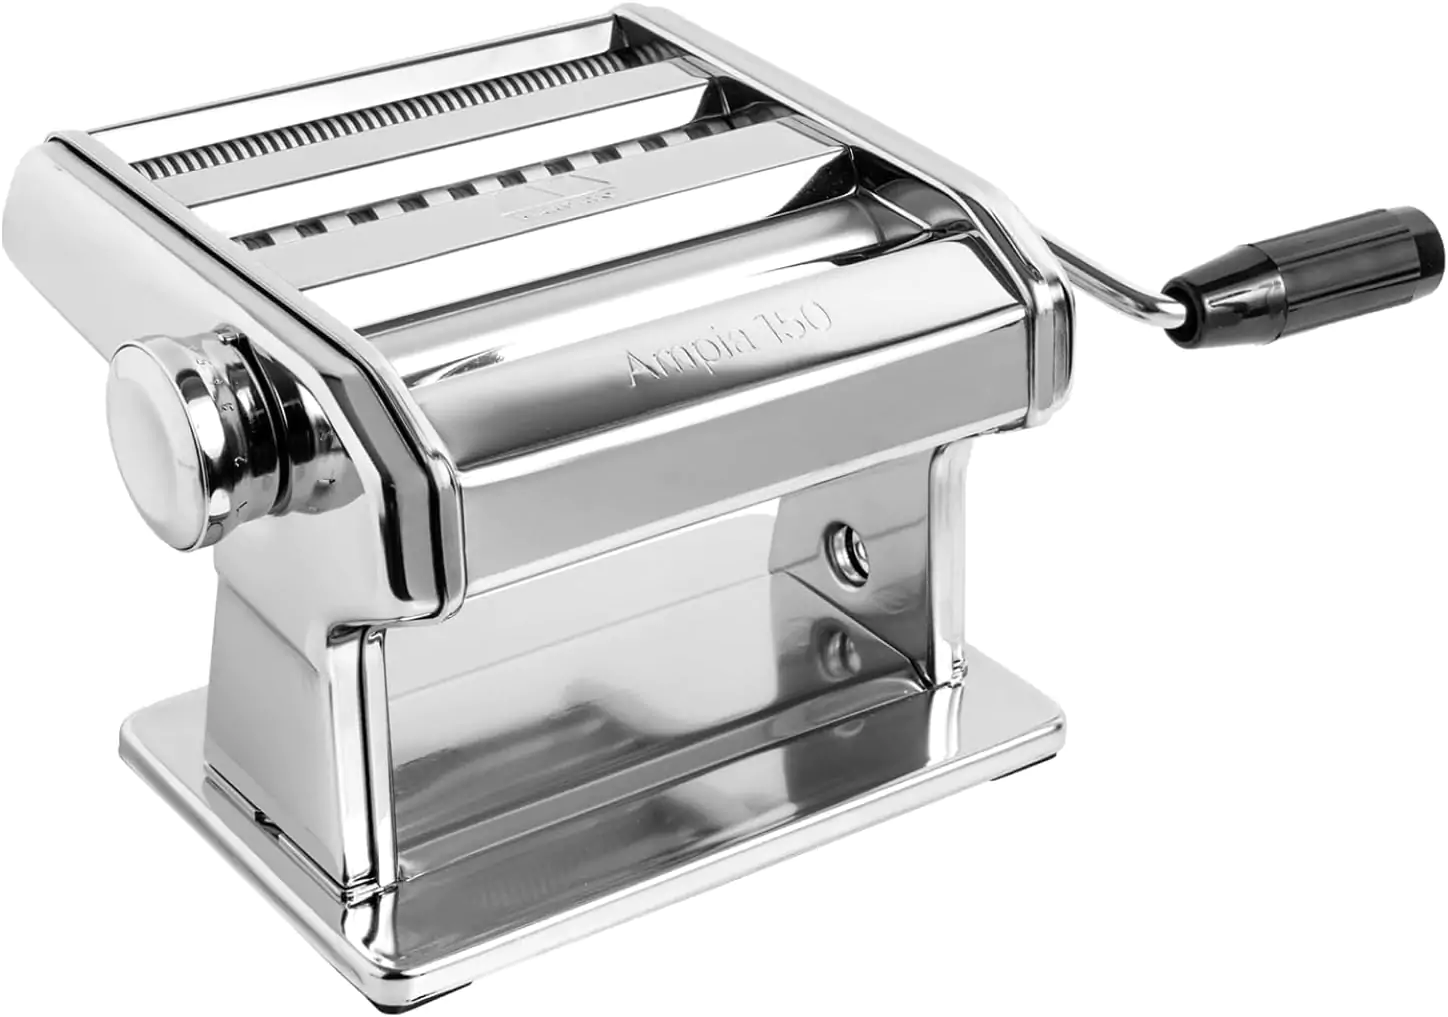 Marcato Atlas Impia 8356 Pasta Maker, Made in Italy, Made in Italy, Chrome-plated Steel, Silver, Includes Pasta Cutter, Manual Crank